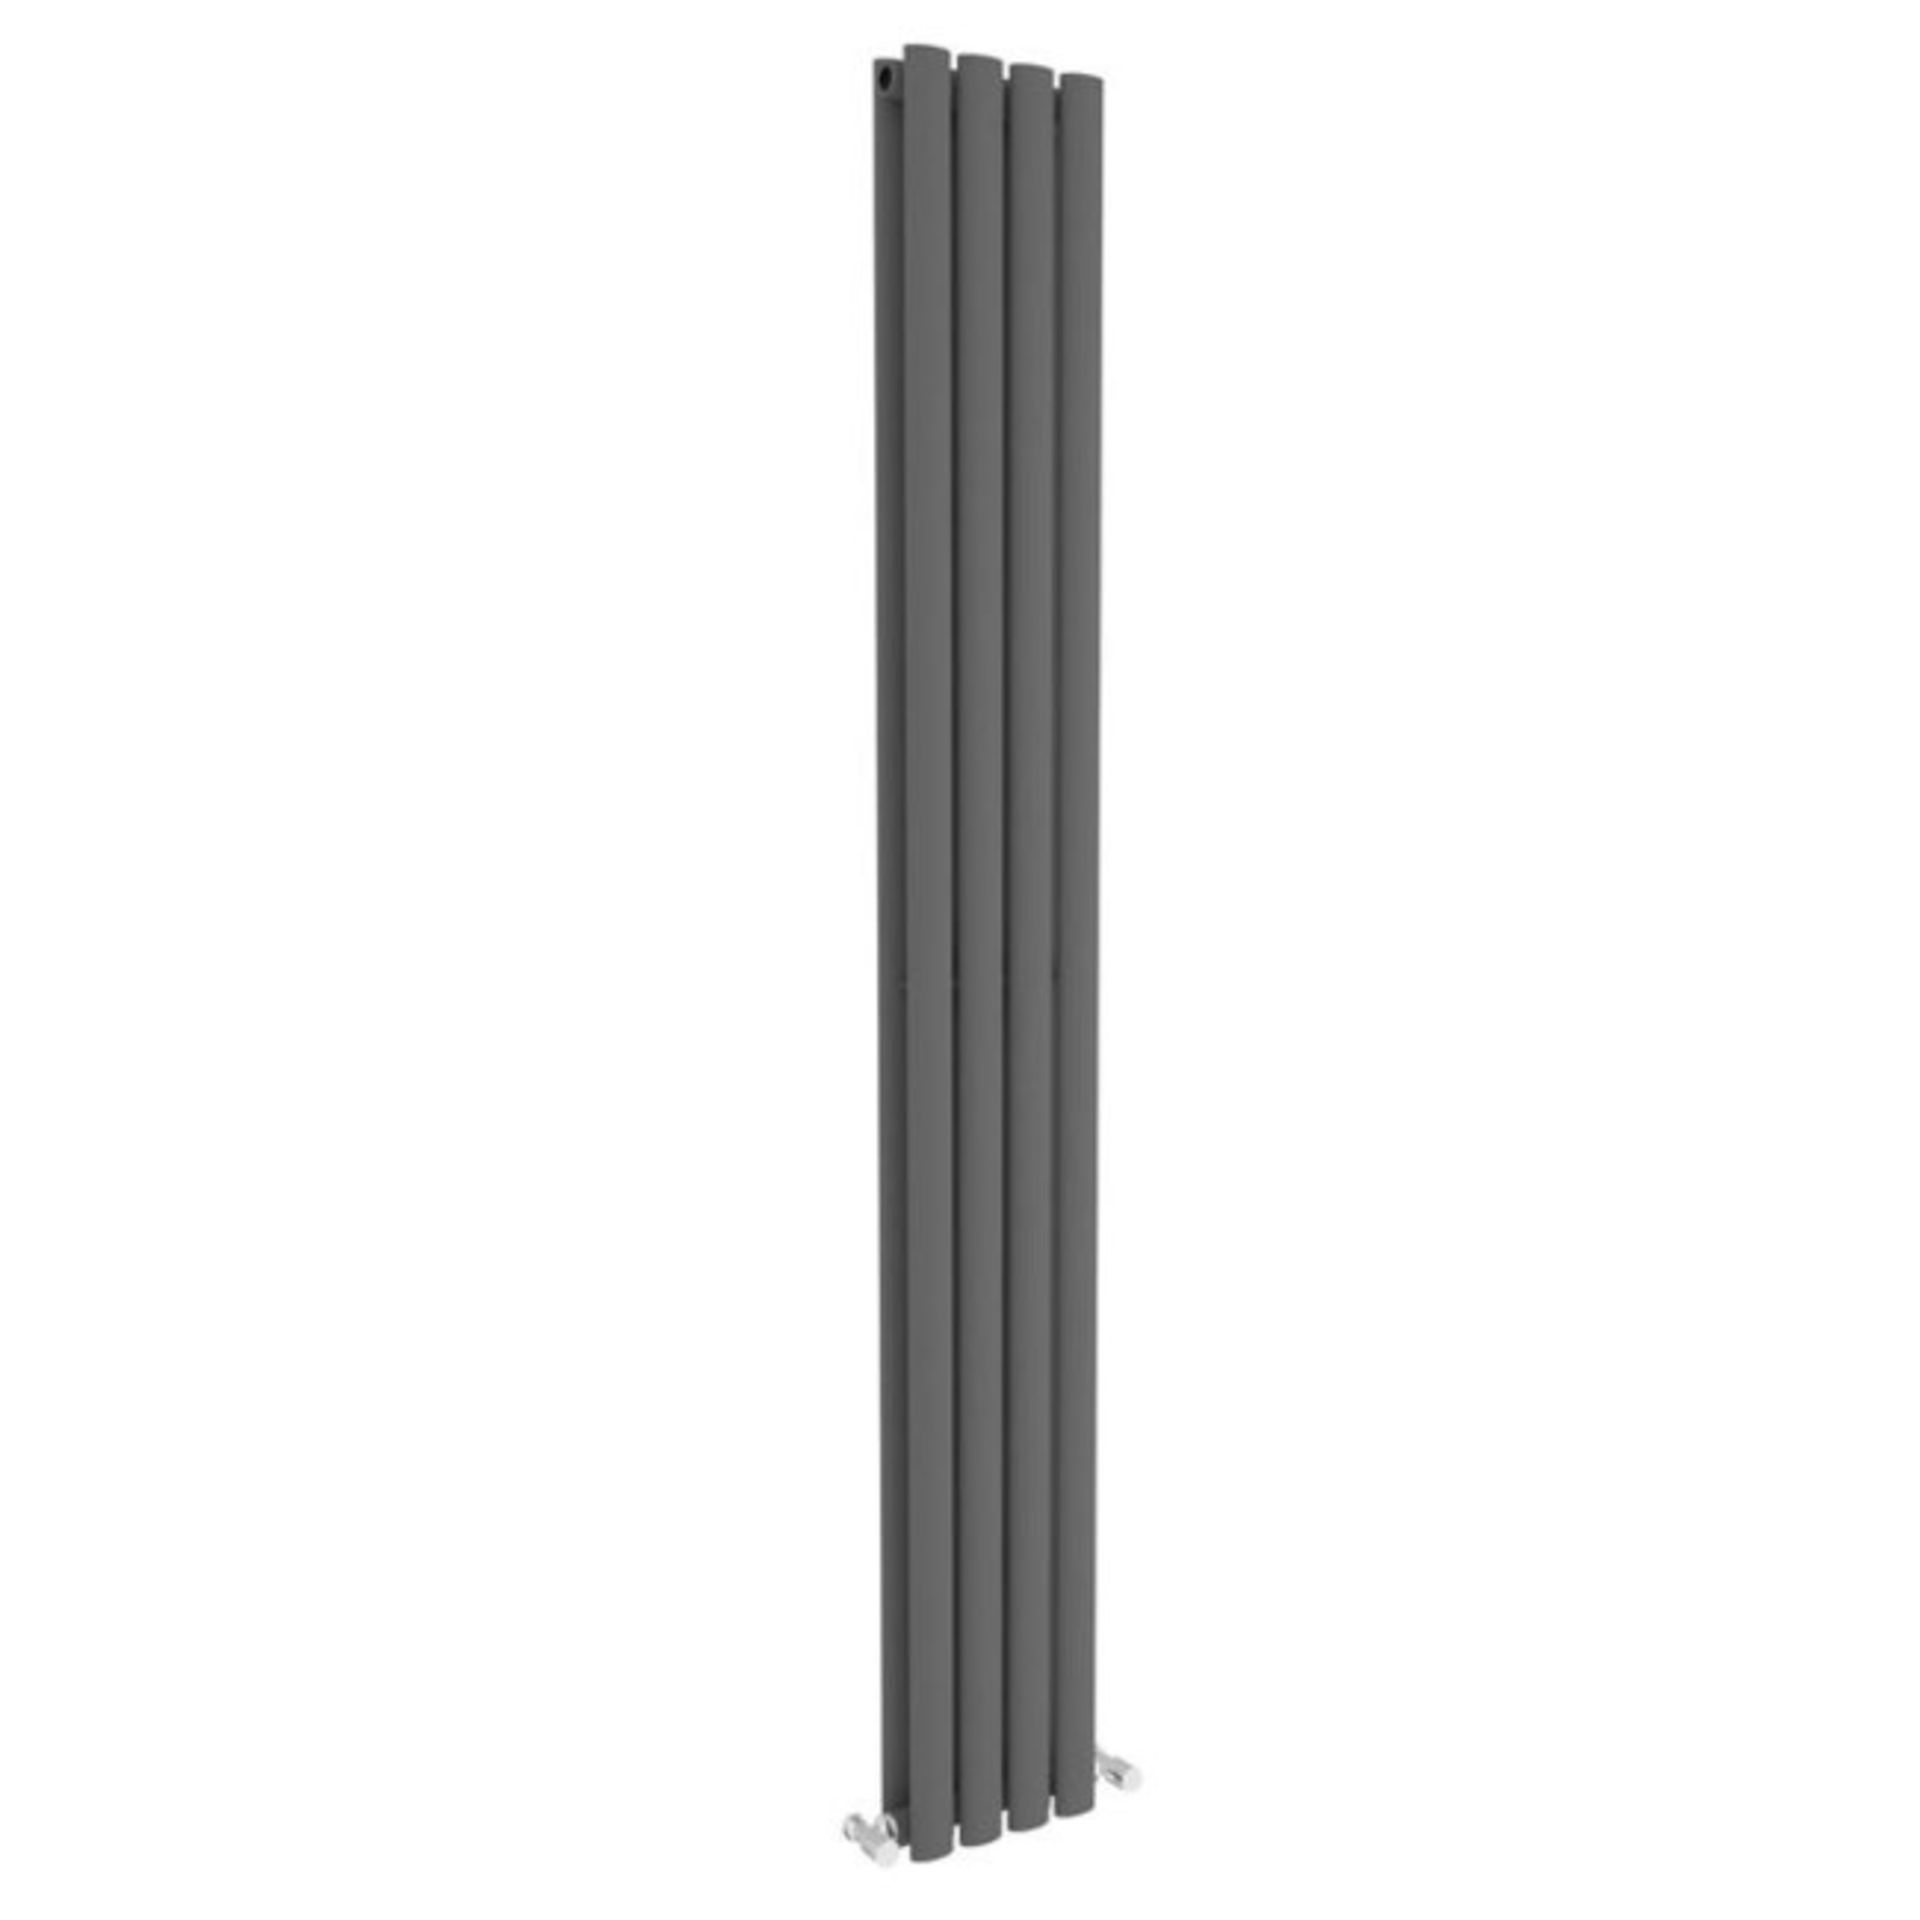 BRAND NEW BOXED 1800x240mm Anthracite Double Oval Tube Vertical Radiator.RRP £294.99. Anthracite - Image 3 of 3